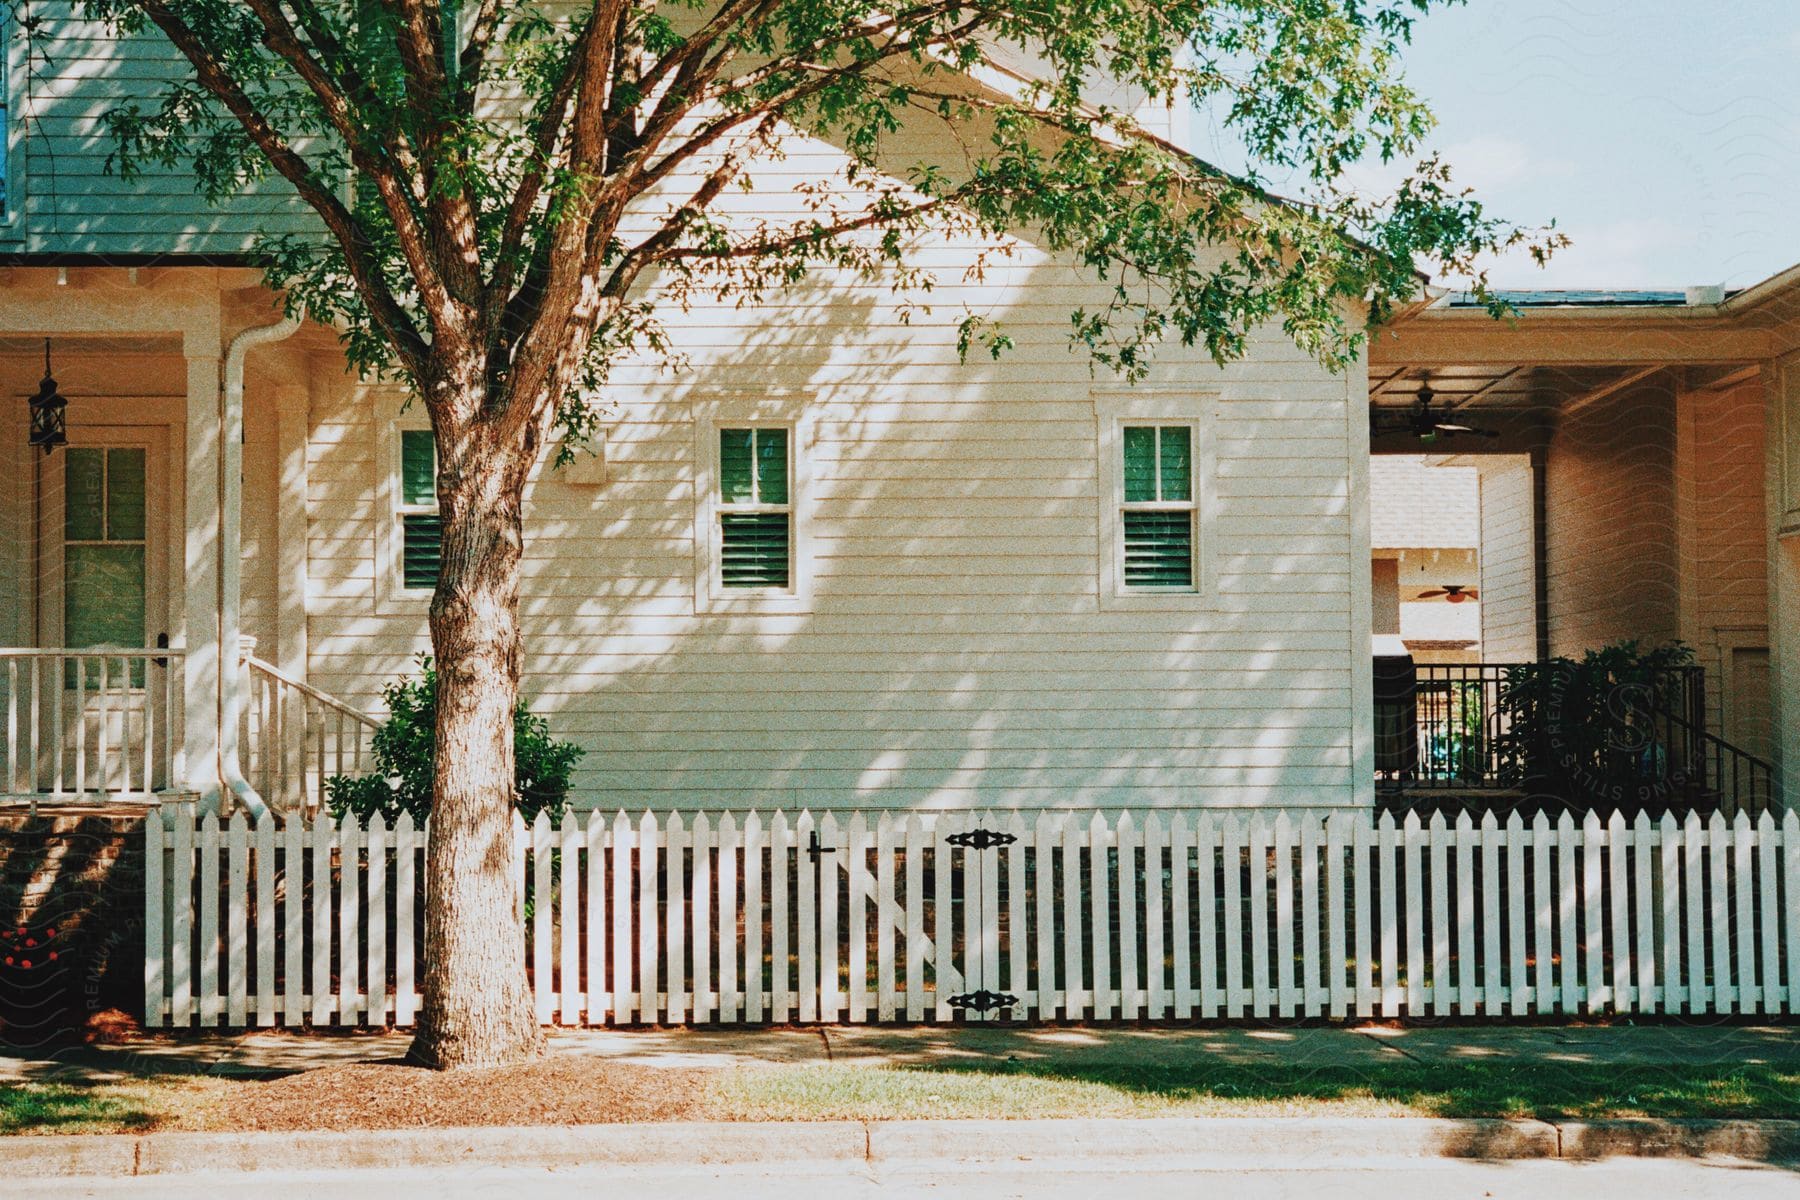 A suburban house with a white picket fence in a residential area